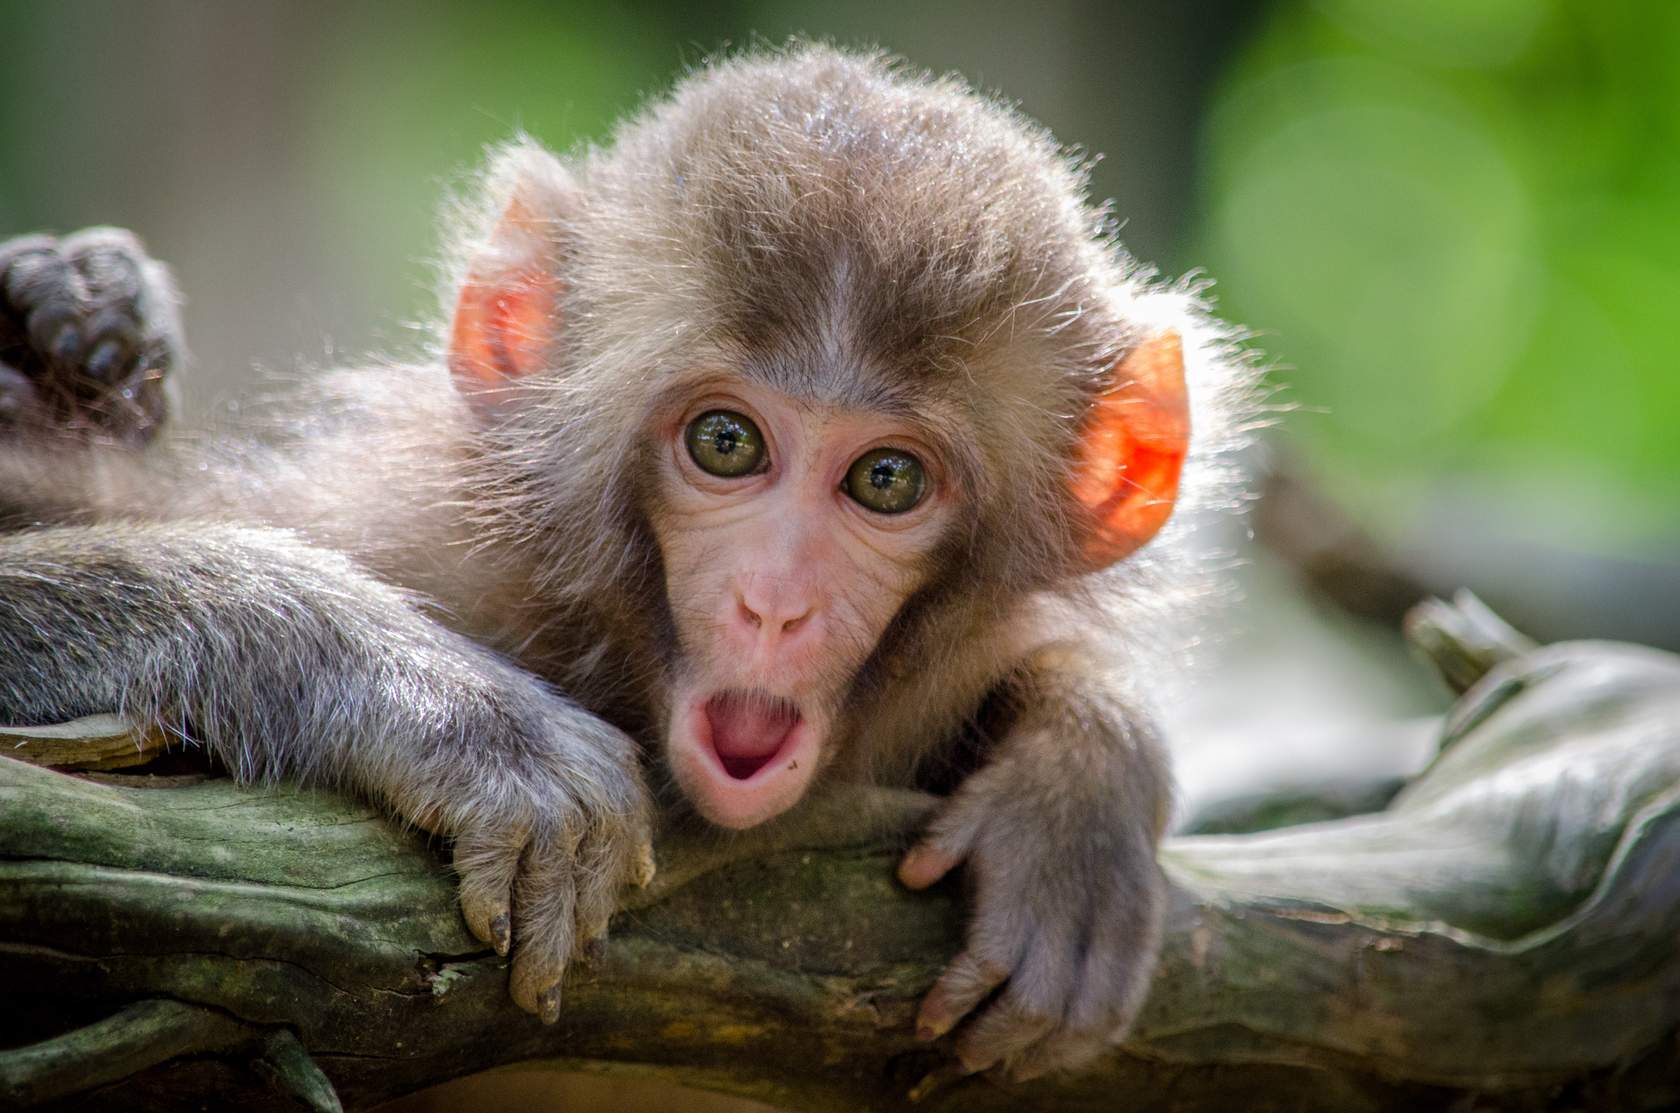 A baby monkey is sitting on a branch.